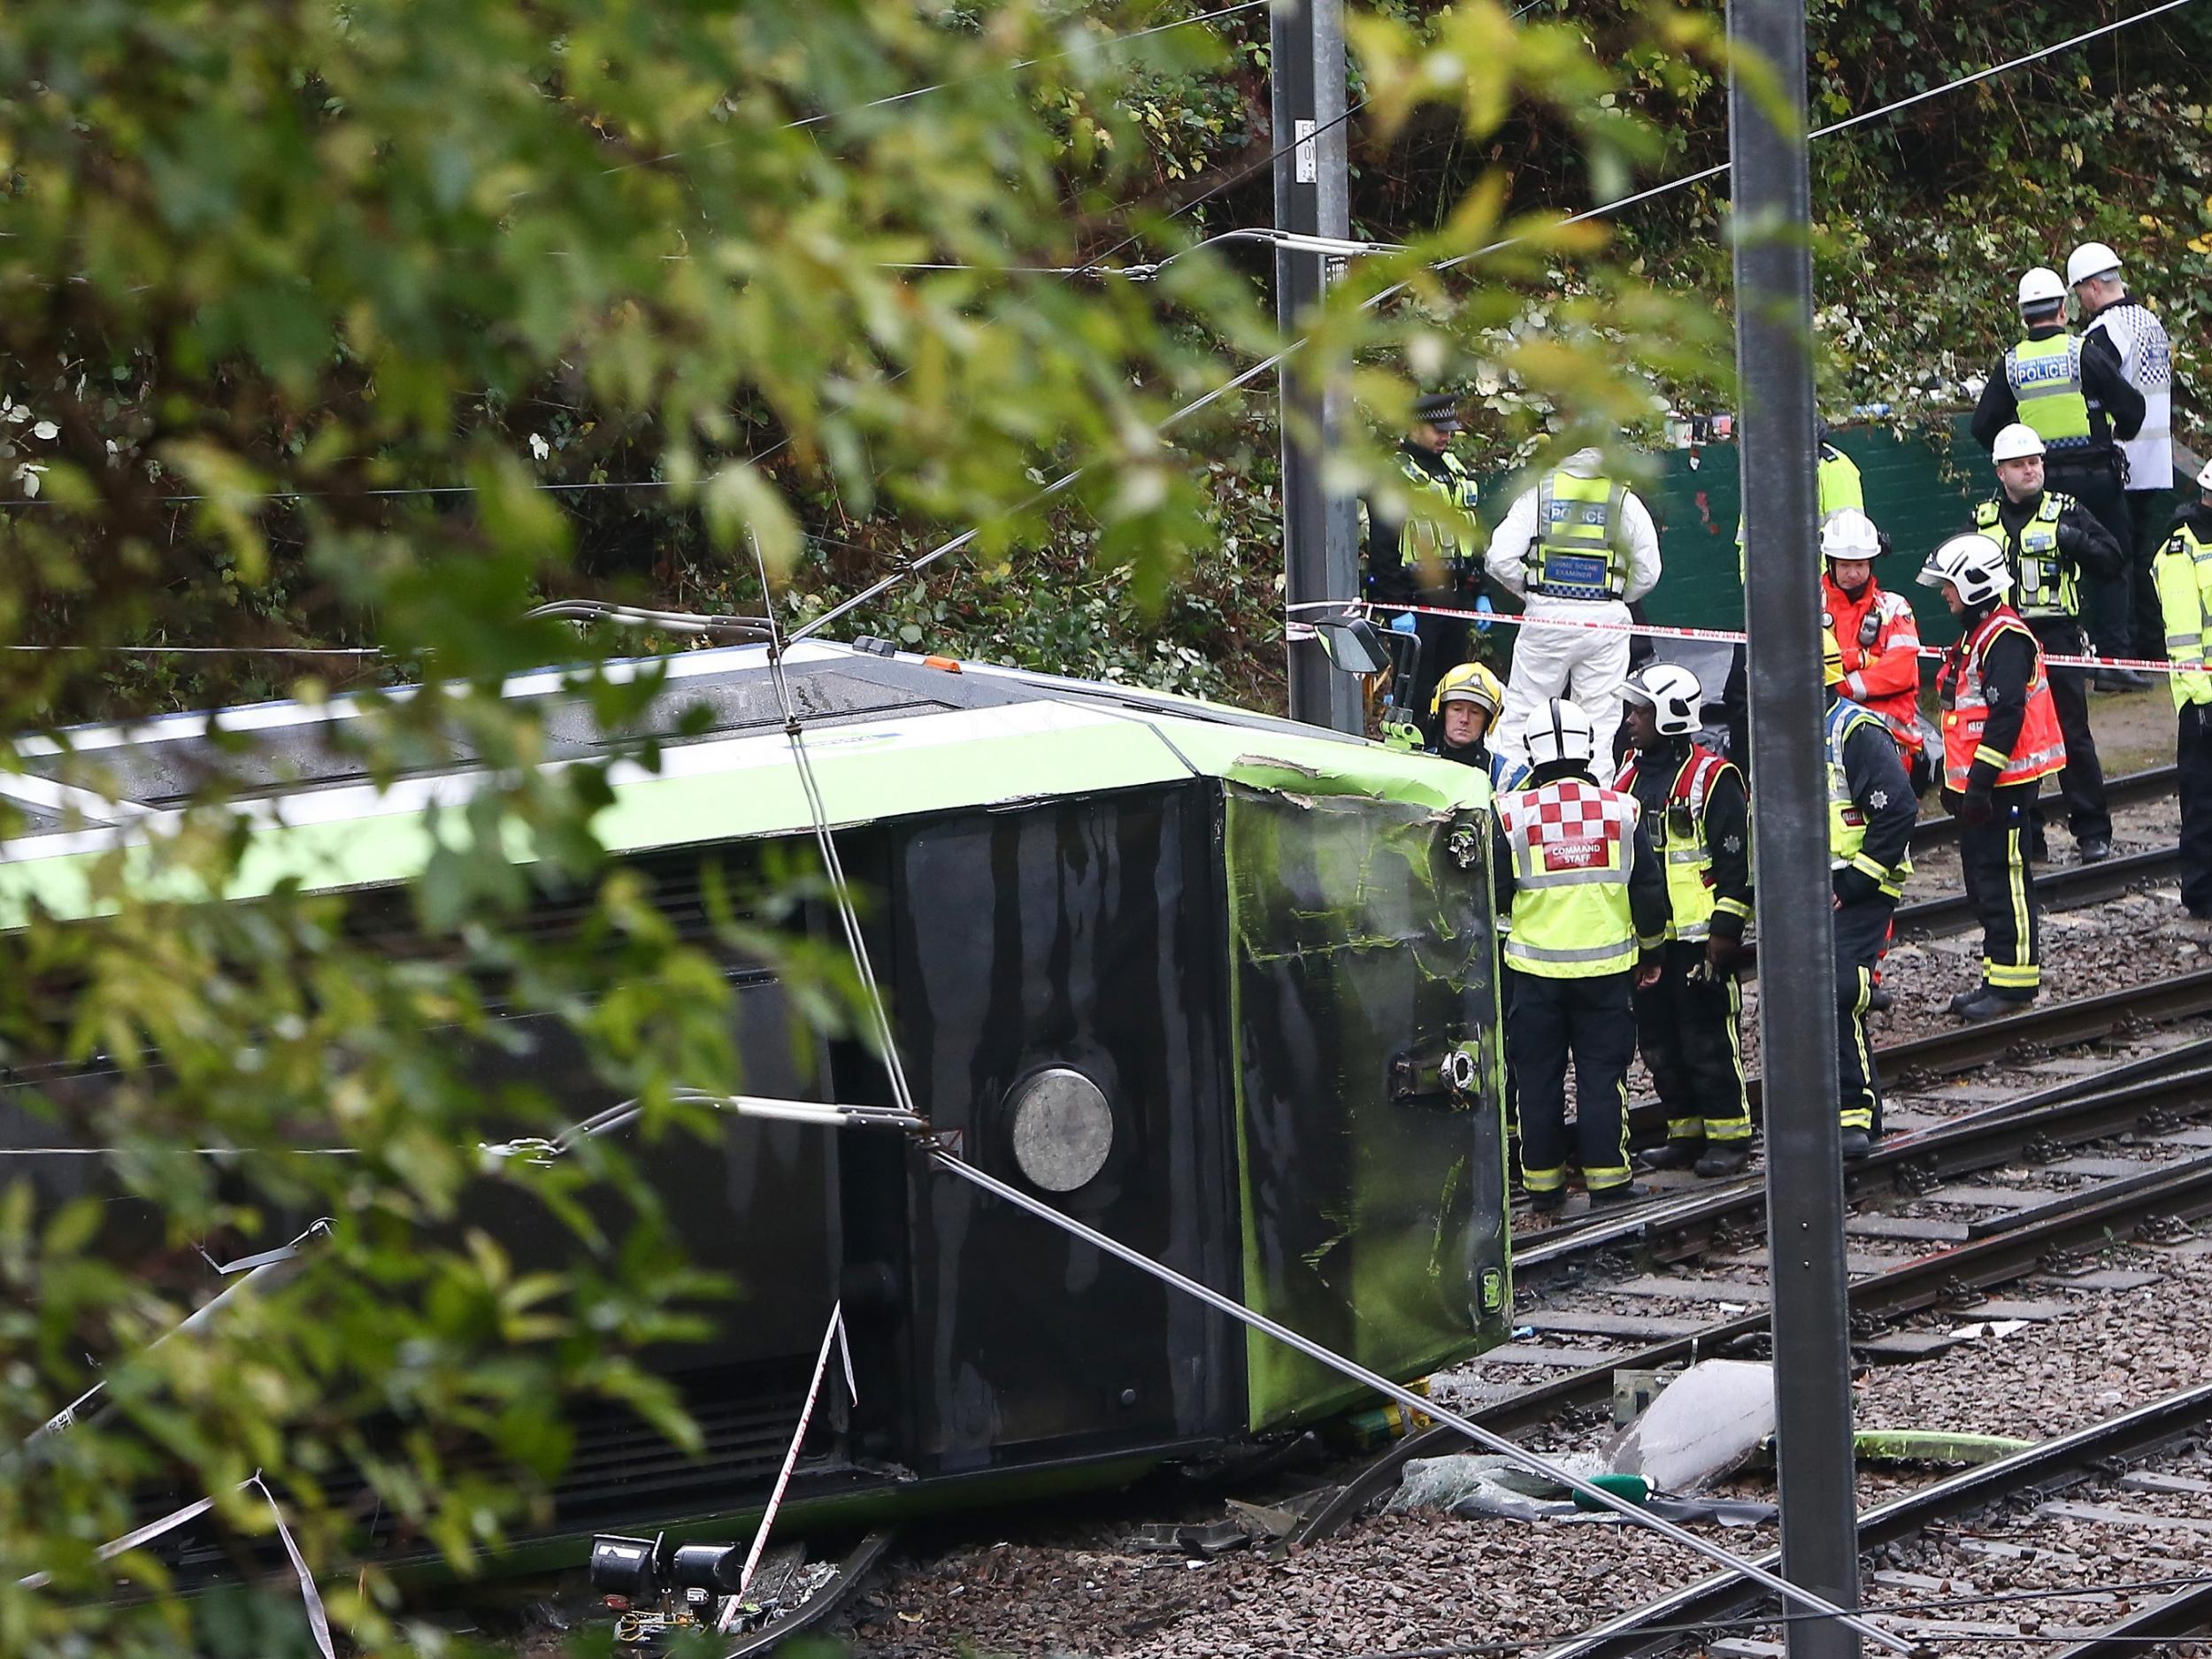 Investigations have been launched after the tram derailed